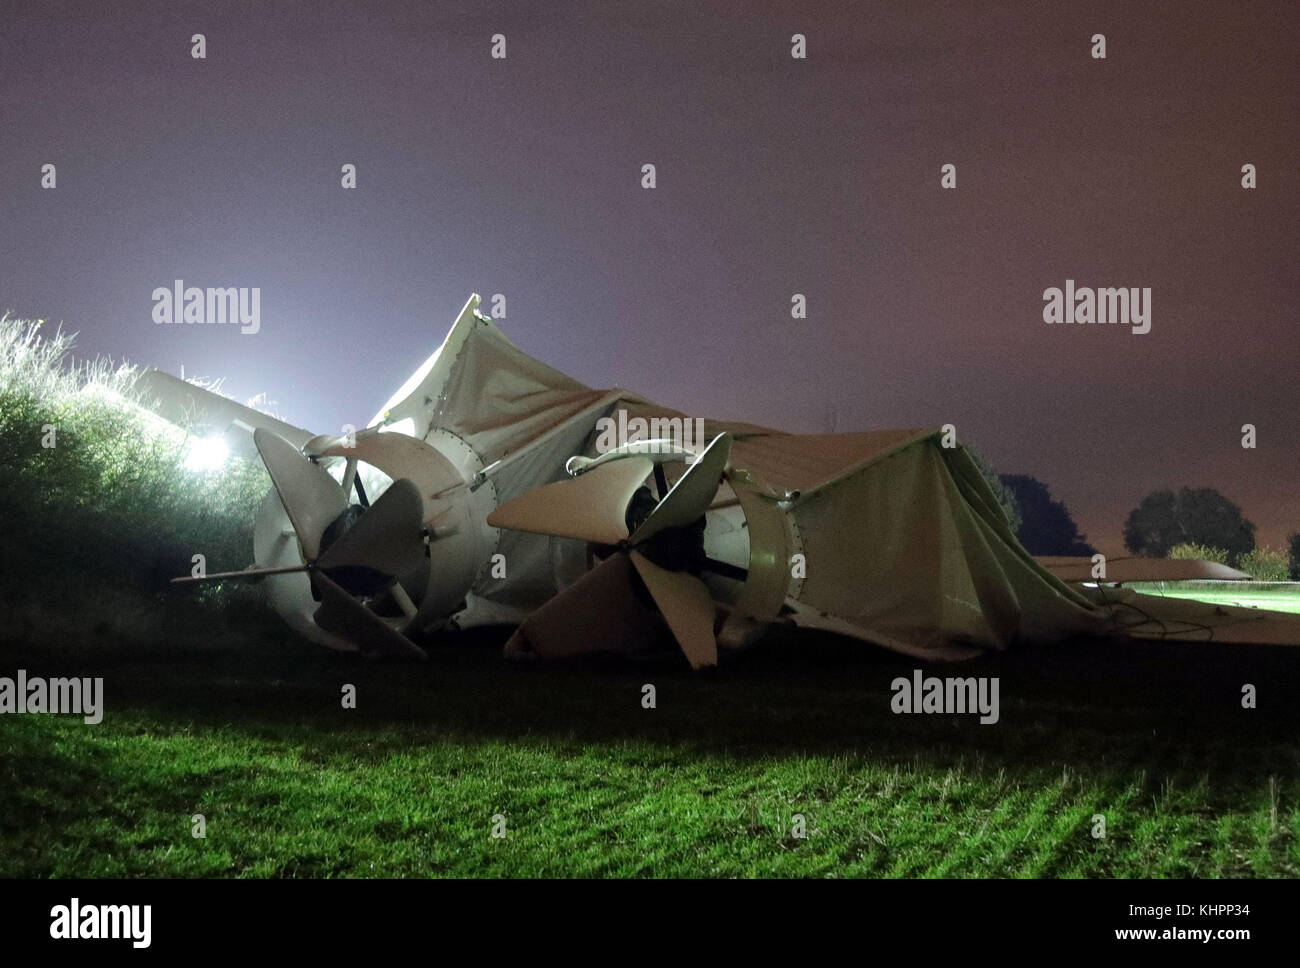 The remains of the Airlander 10, the world's largest aircraft, lies on the ground at Cardington airfield in Bedfordshire, as the aircraft, came loose from its moorings causing its hull to rip and deflate. Stock Photo